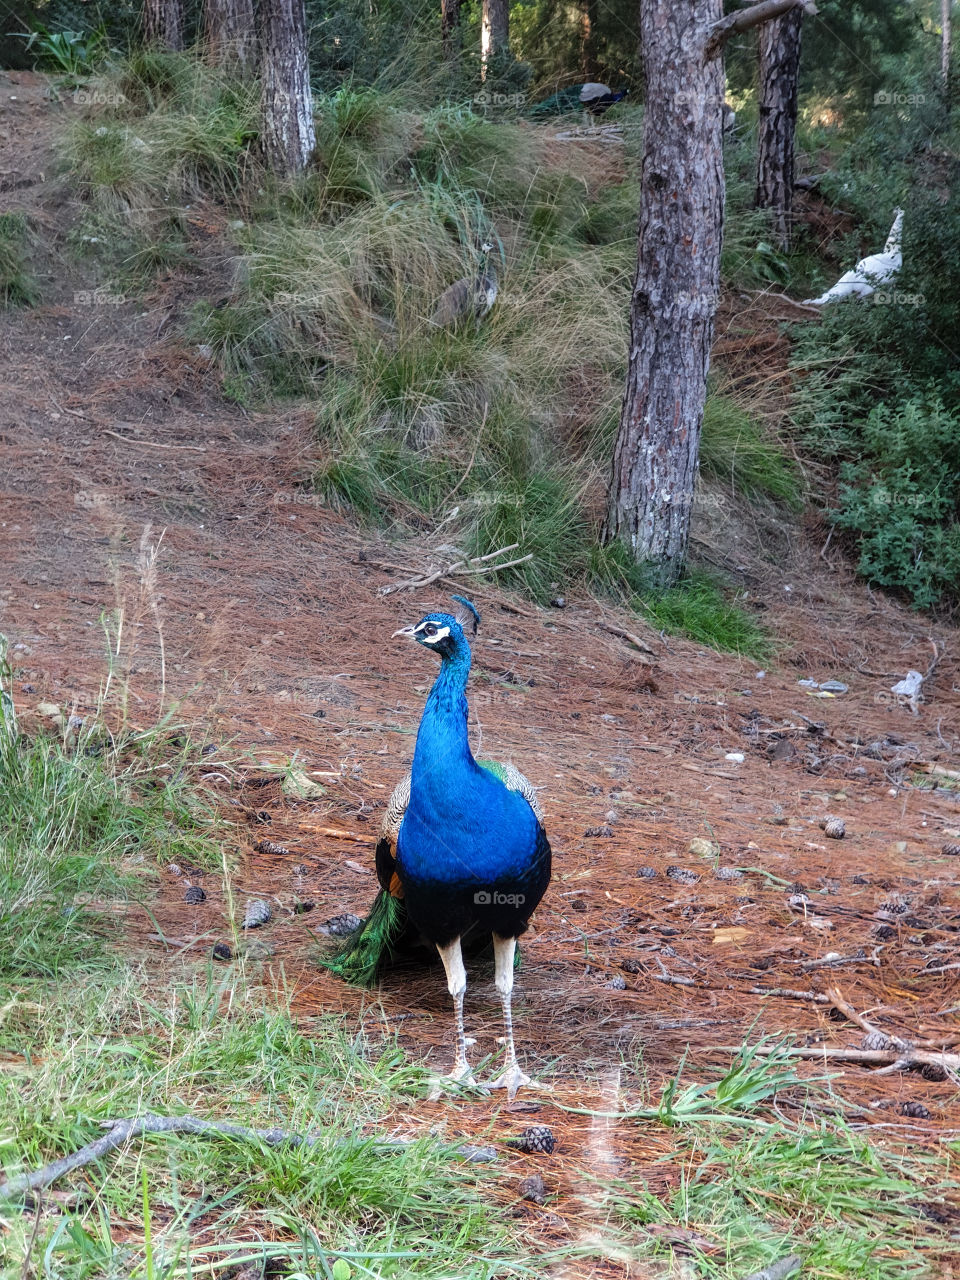 Peacock posing in the fores